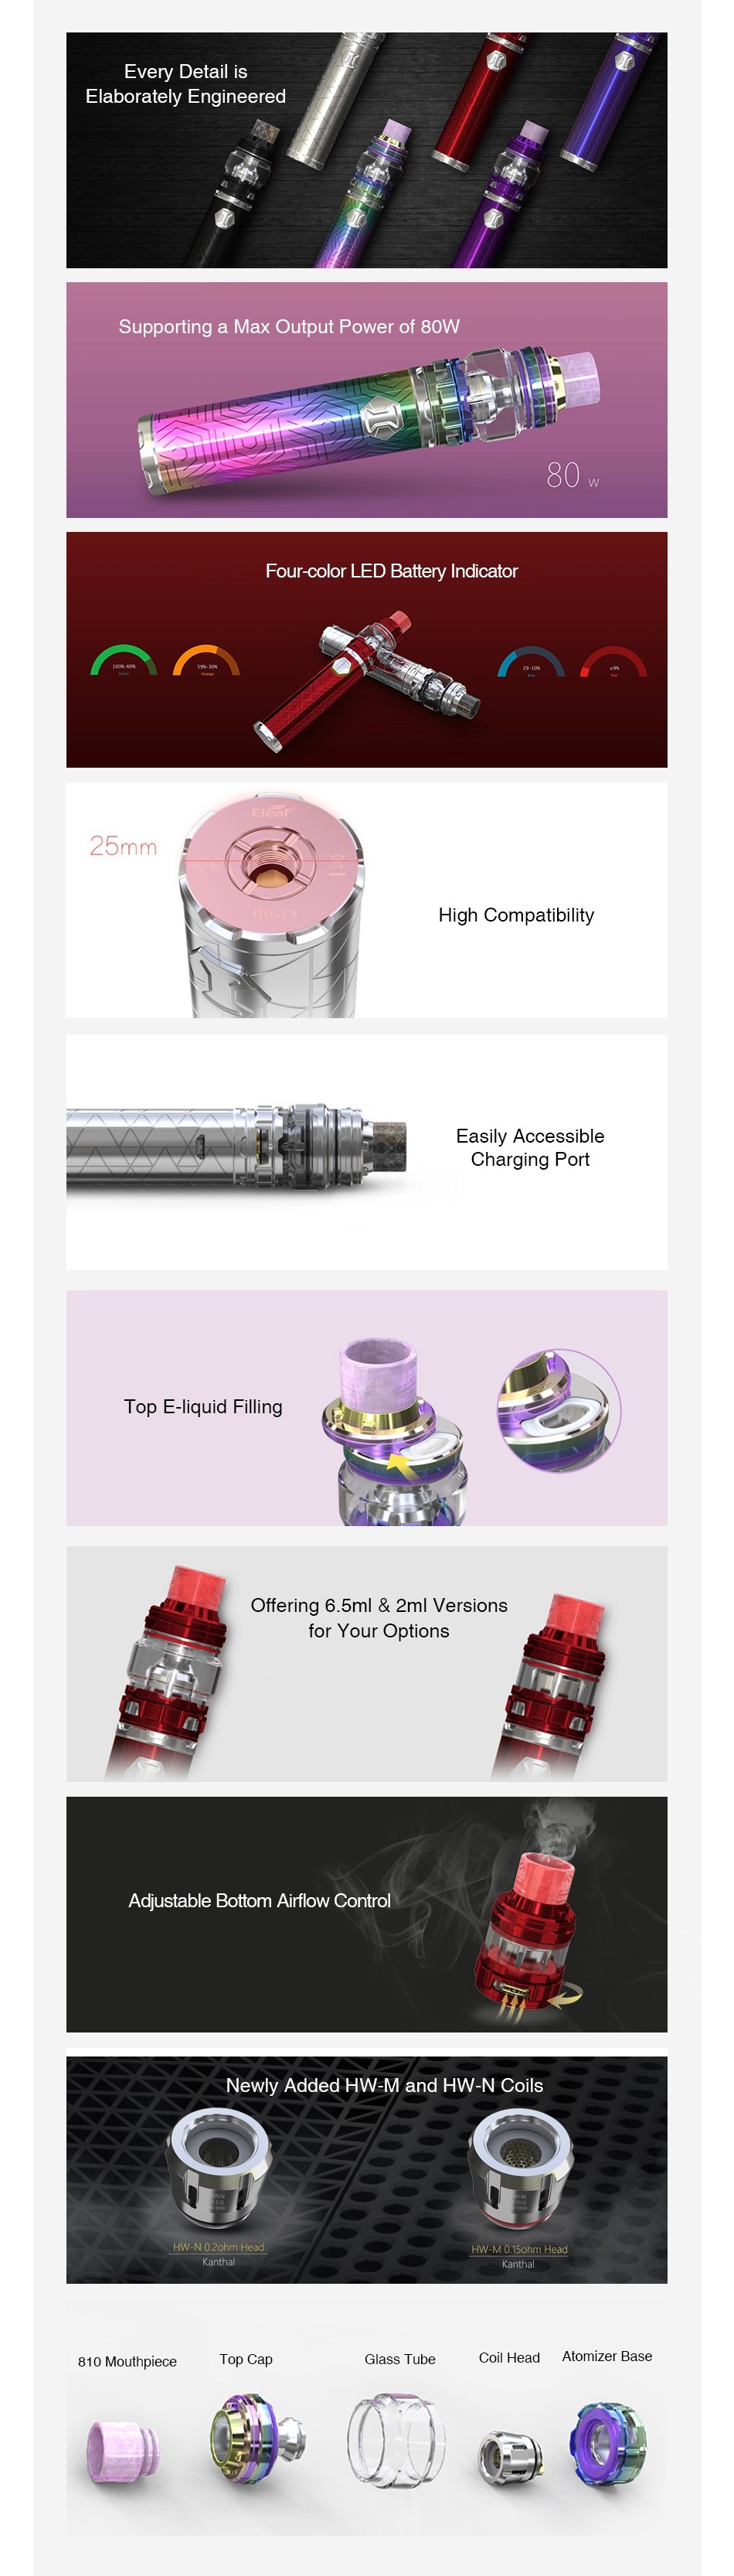 Eleaf iJust 3 Starter Kit 3000mAh Every Detail is Elaborately engineered Supporting a Max Output Power of 80W Four color LED Battery Indicator mrm High Compatibility Easily Accessible Charging Port Top E liquid Filling Offering 6 5ml 2ml Versions for Your Options Adjustable Bottom Airflow Control Newly Added HW M and HW N Coi 810 Mouthpiece ClEss Tube Cuil Iled  tom zer base